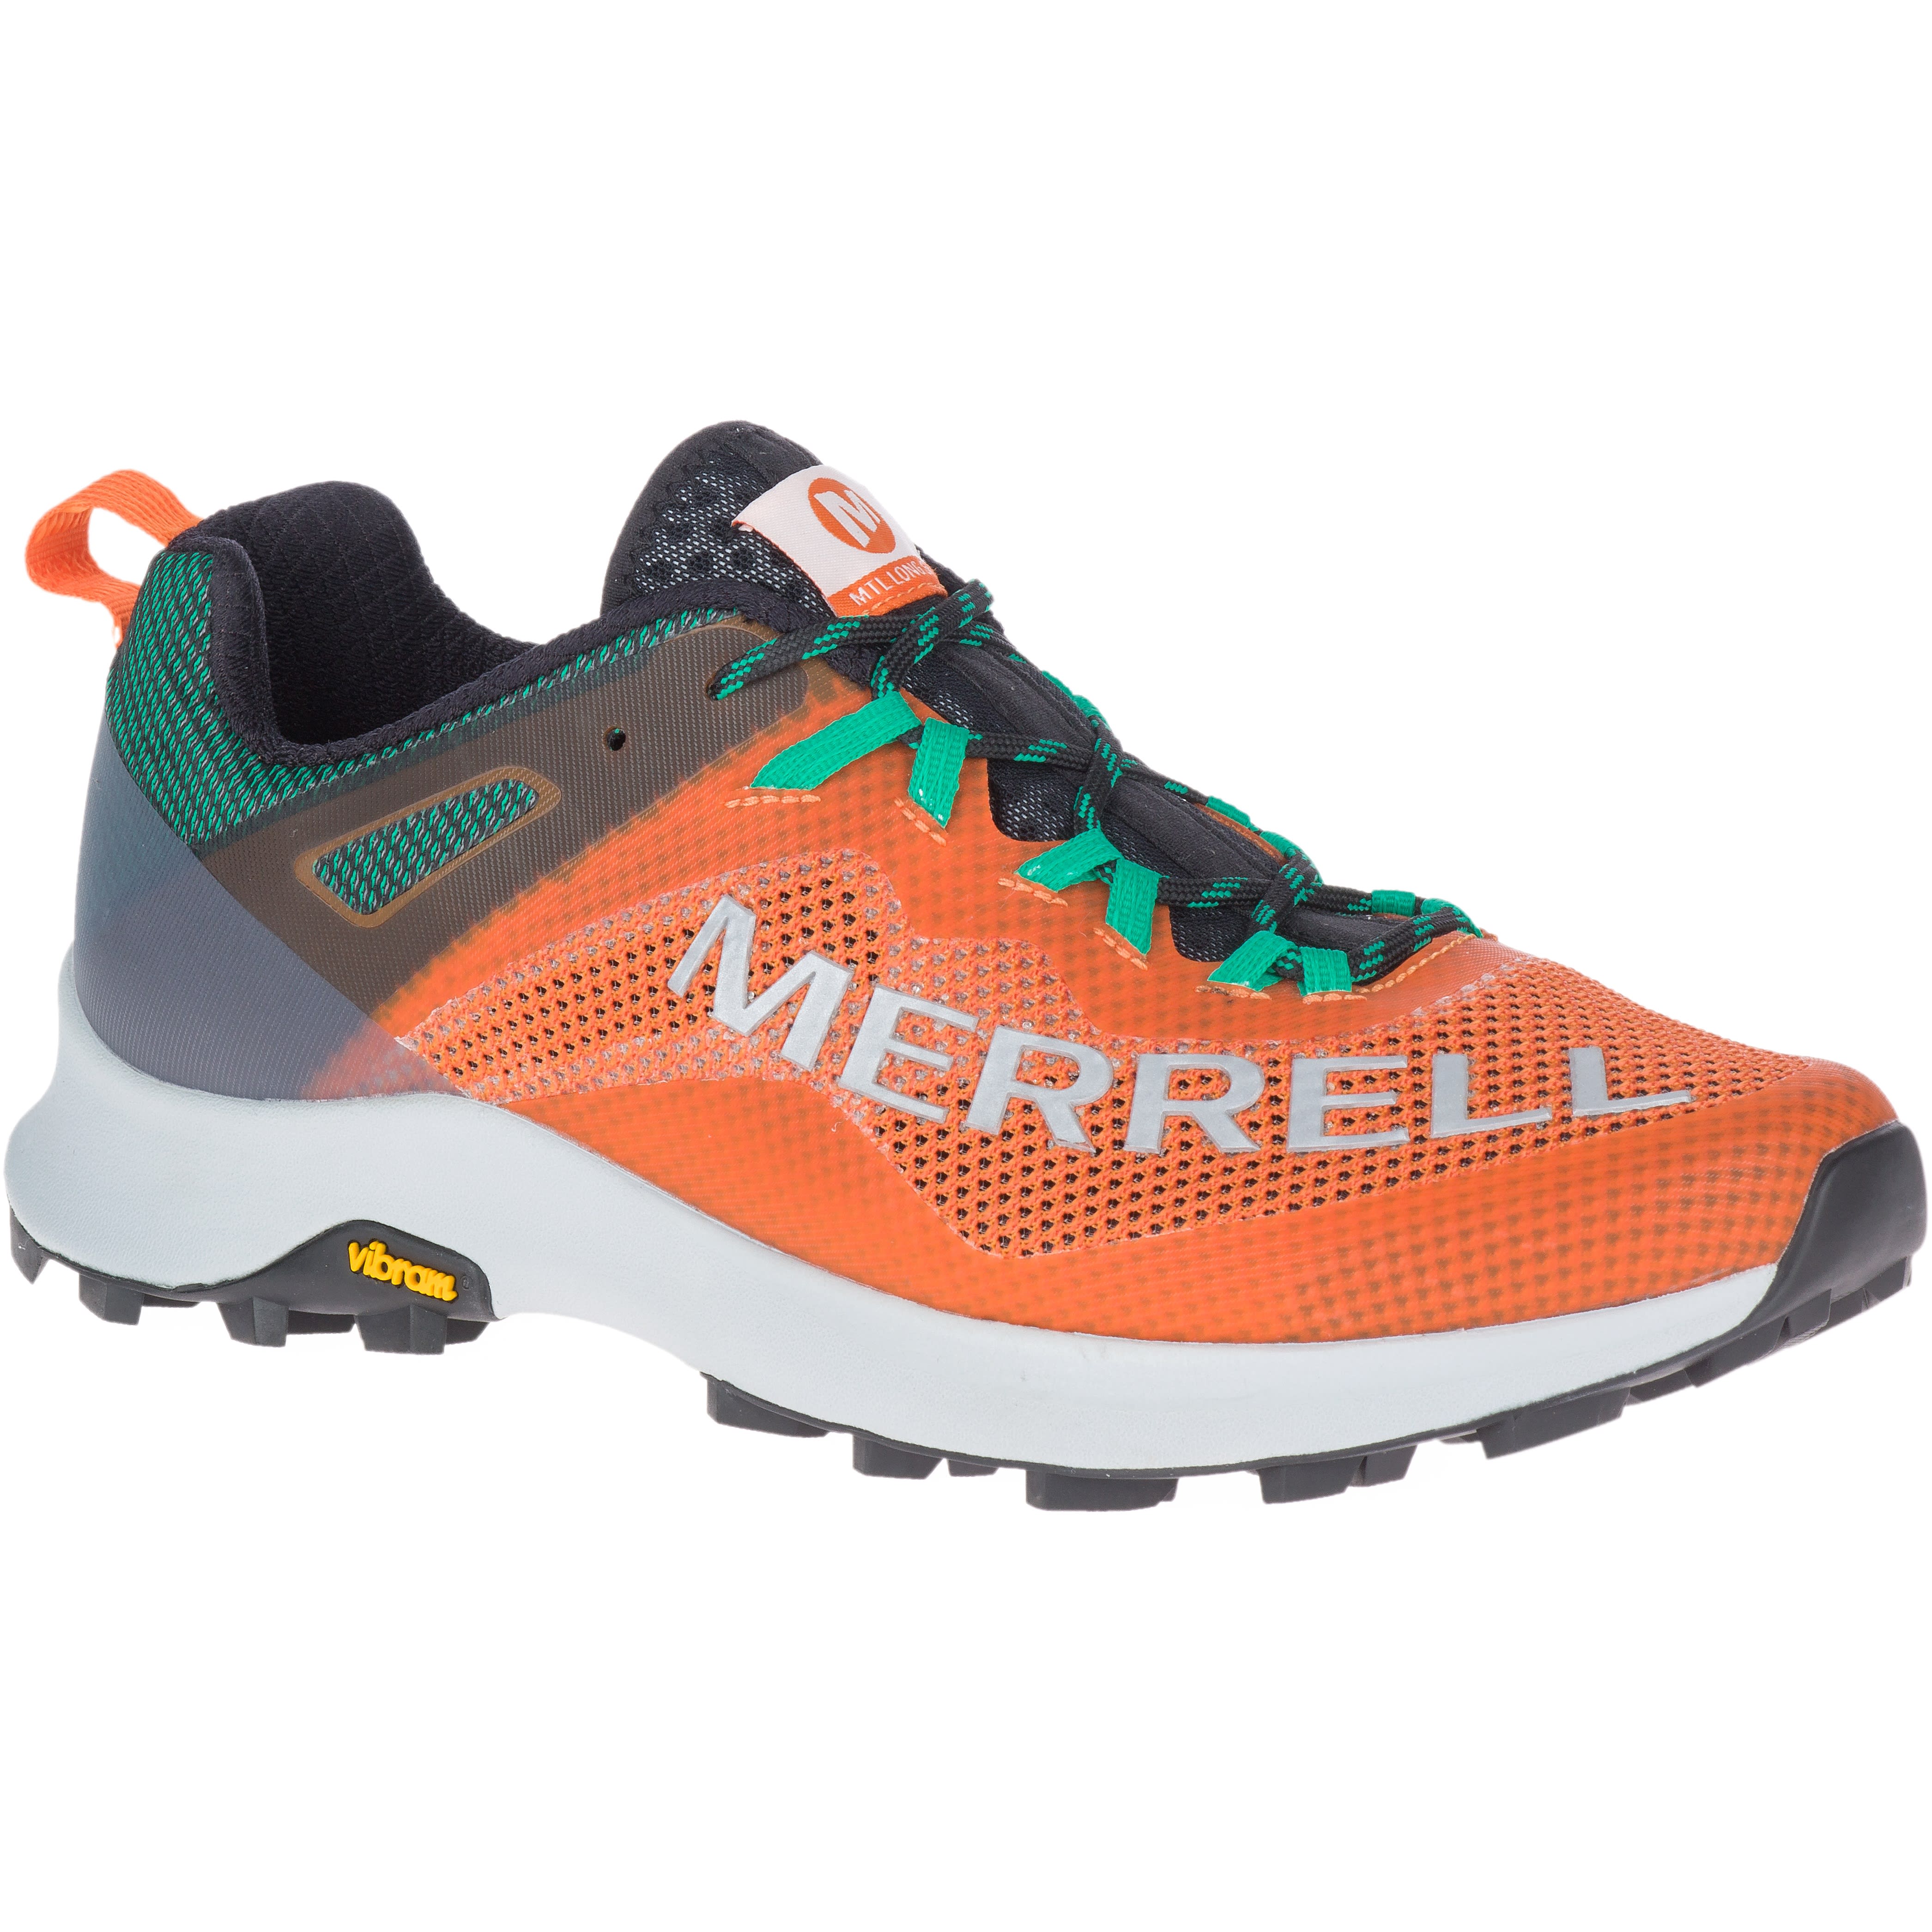 Merrell Men's MTL Long Sky from Outnorth